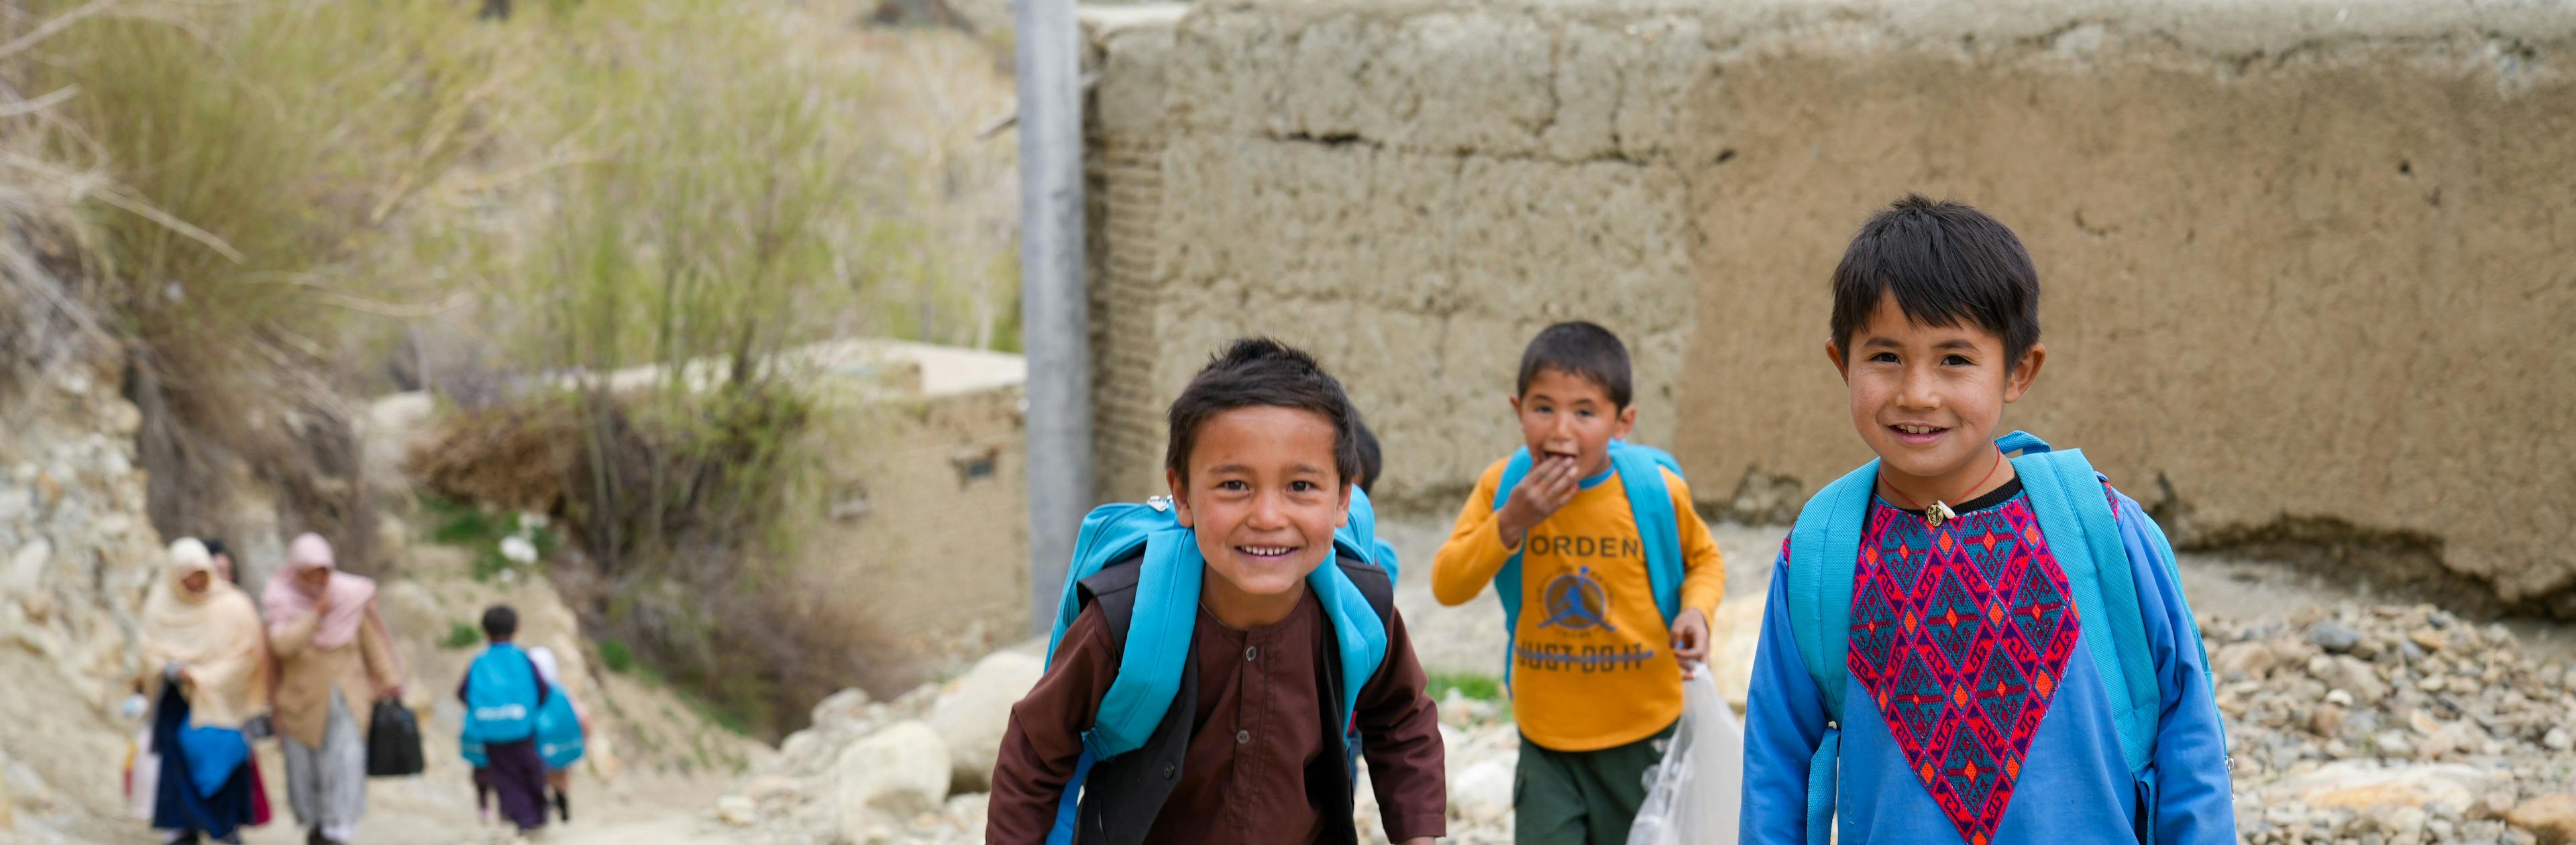 Building back better after emergency strikes - kids go to school in Afghanistan